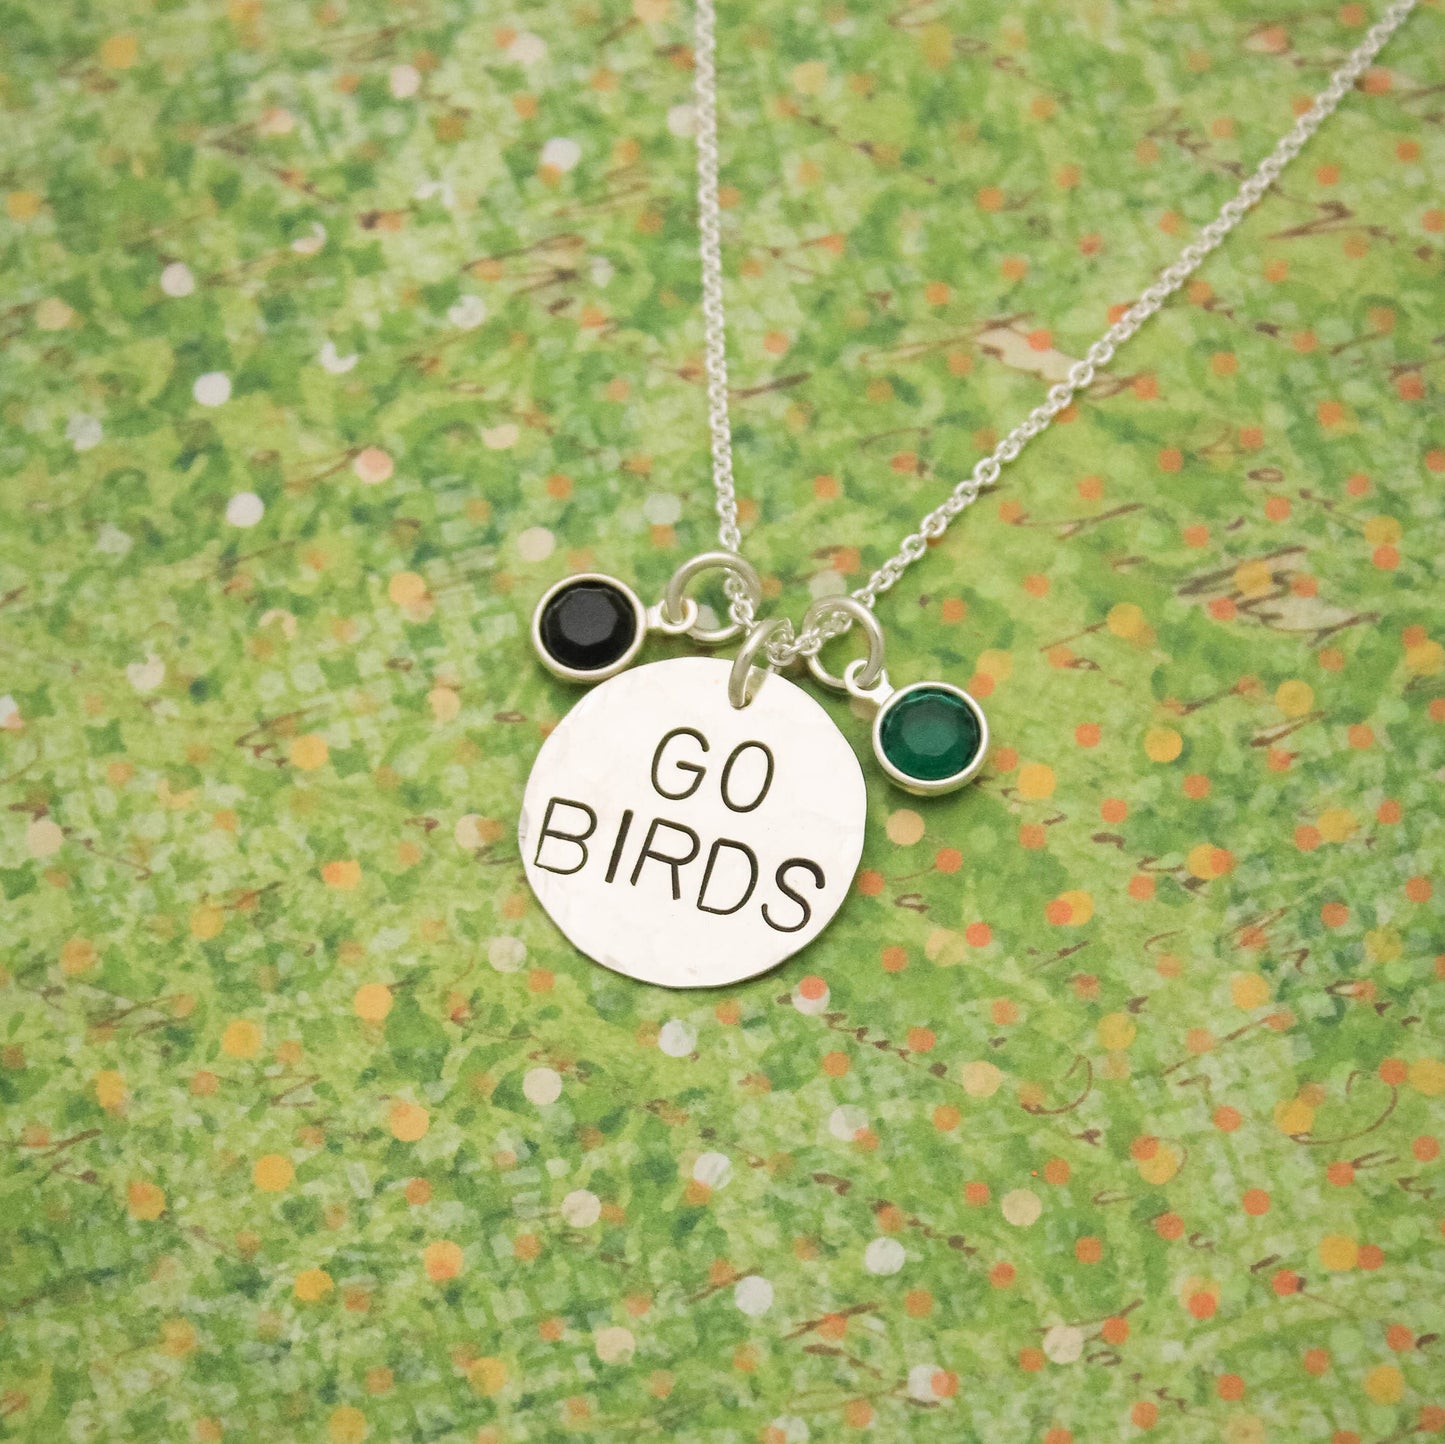 GO BIRDS Eagles Football Necklace in Sterling Silver, Game Day Eagles Jewelry, Philadelphia Eagles Necklace, Gifts for Her, Football Jewelry